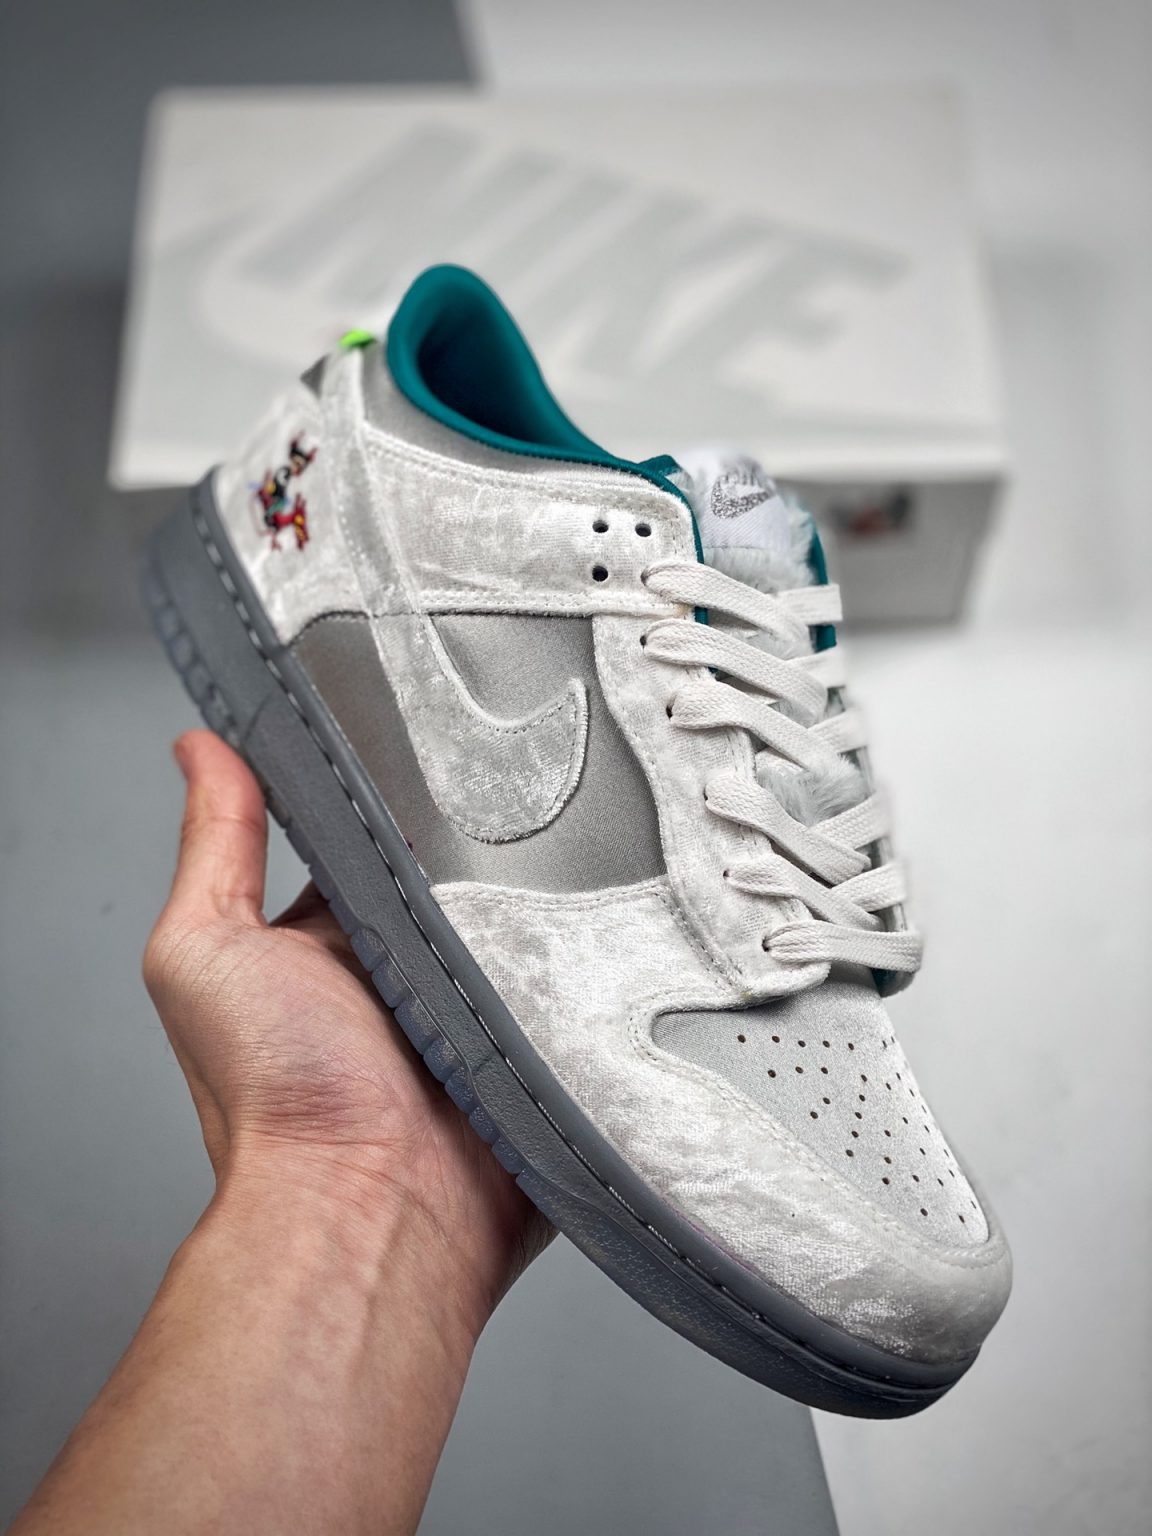 Nike Dunk Low “Ice Christmas” DO2326001 For Sale Sneaker Hello